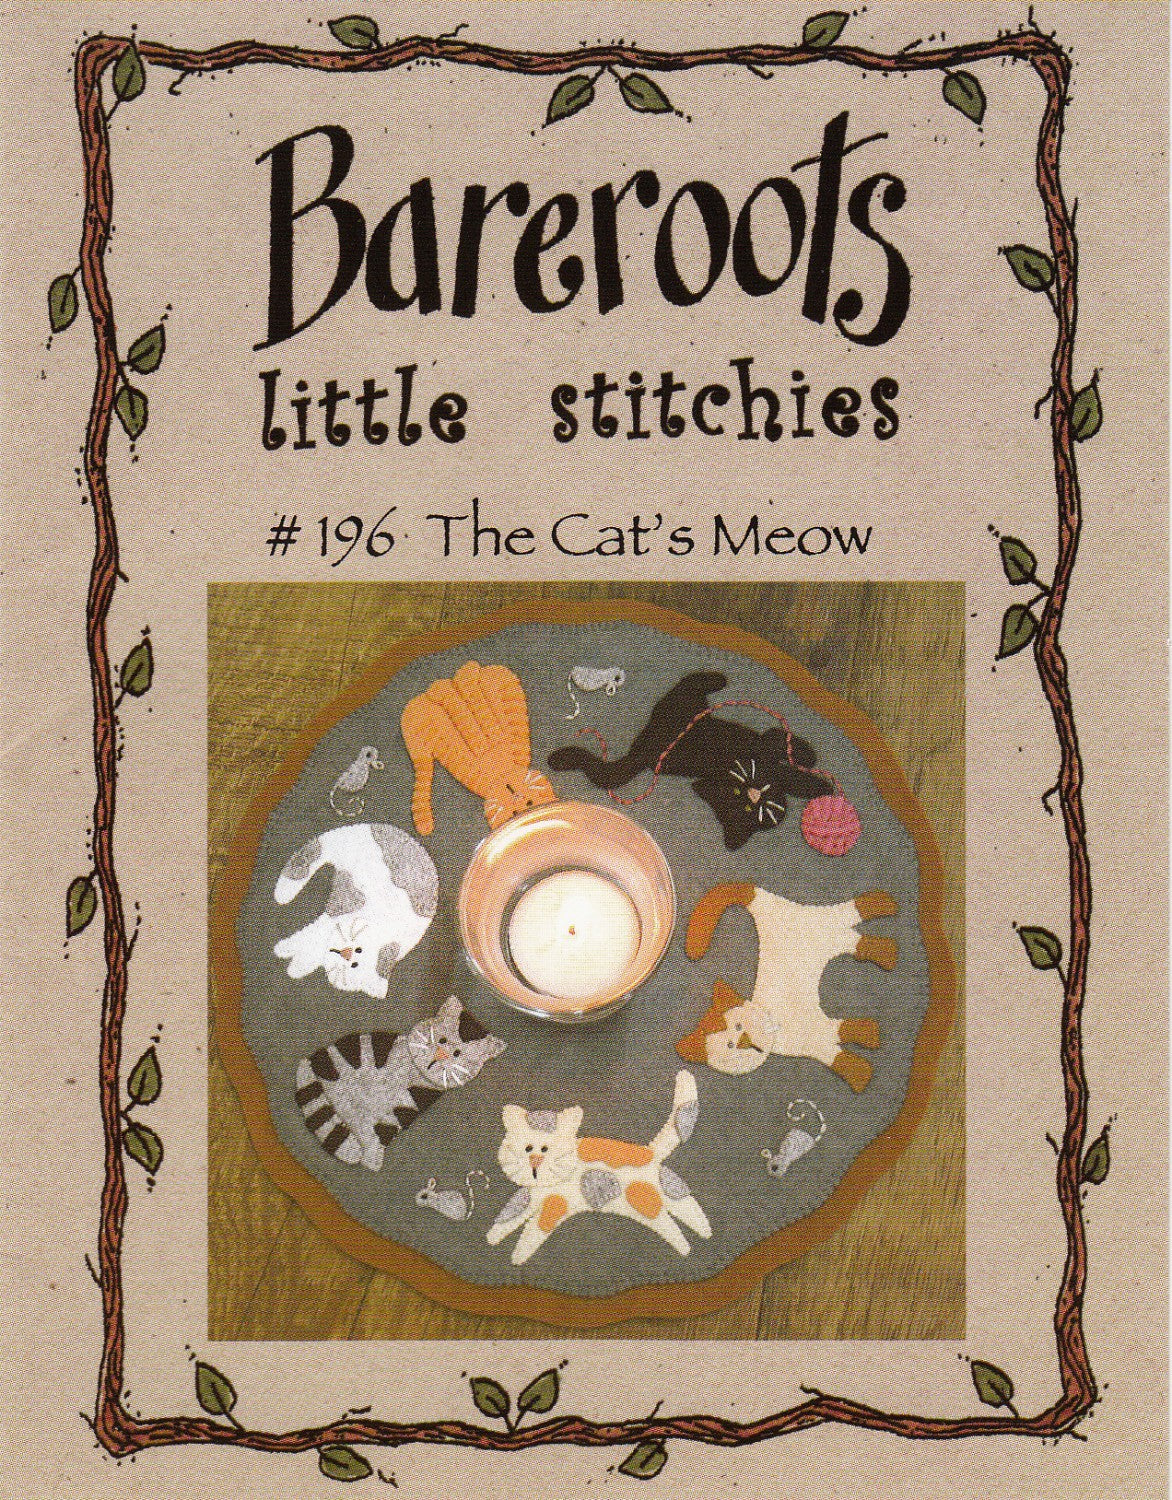 Candle Mat Kit from Bareroots - The Cat's Meow